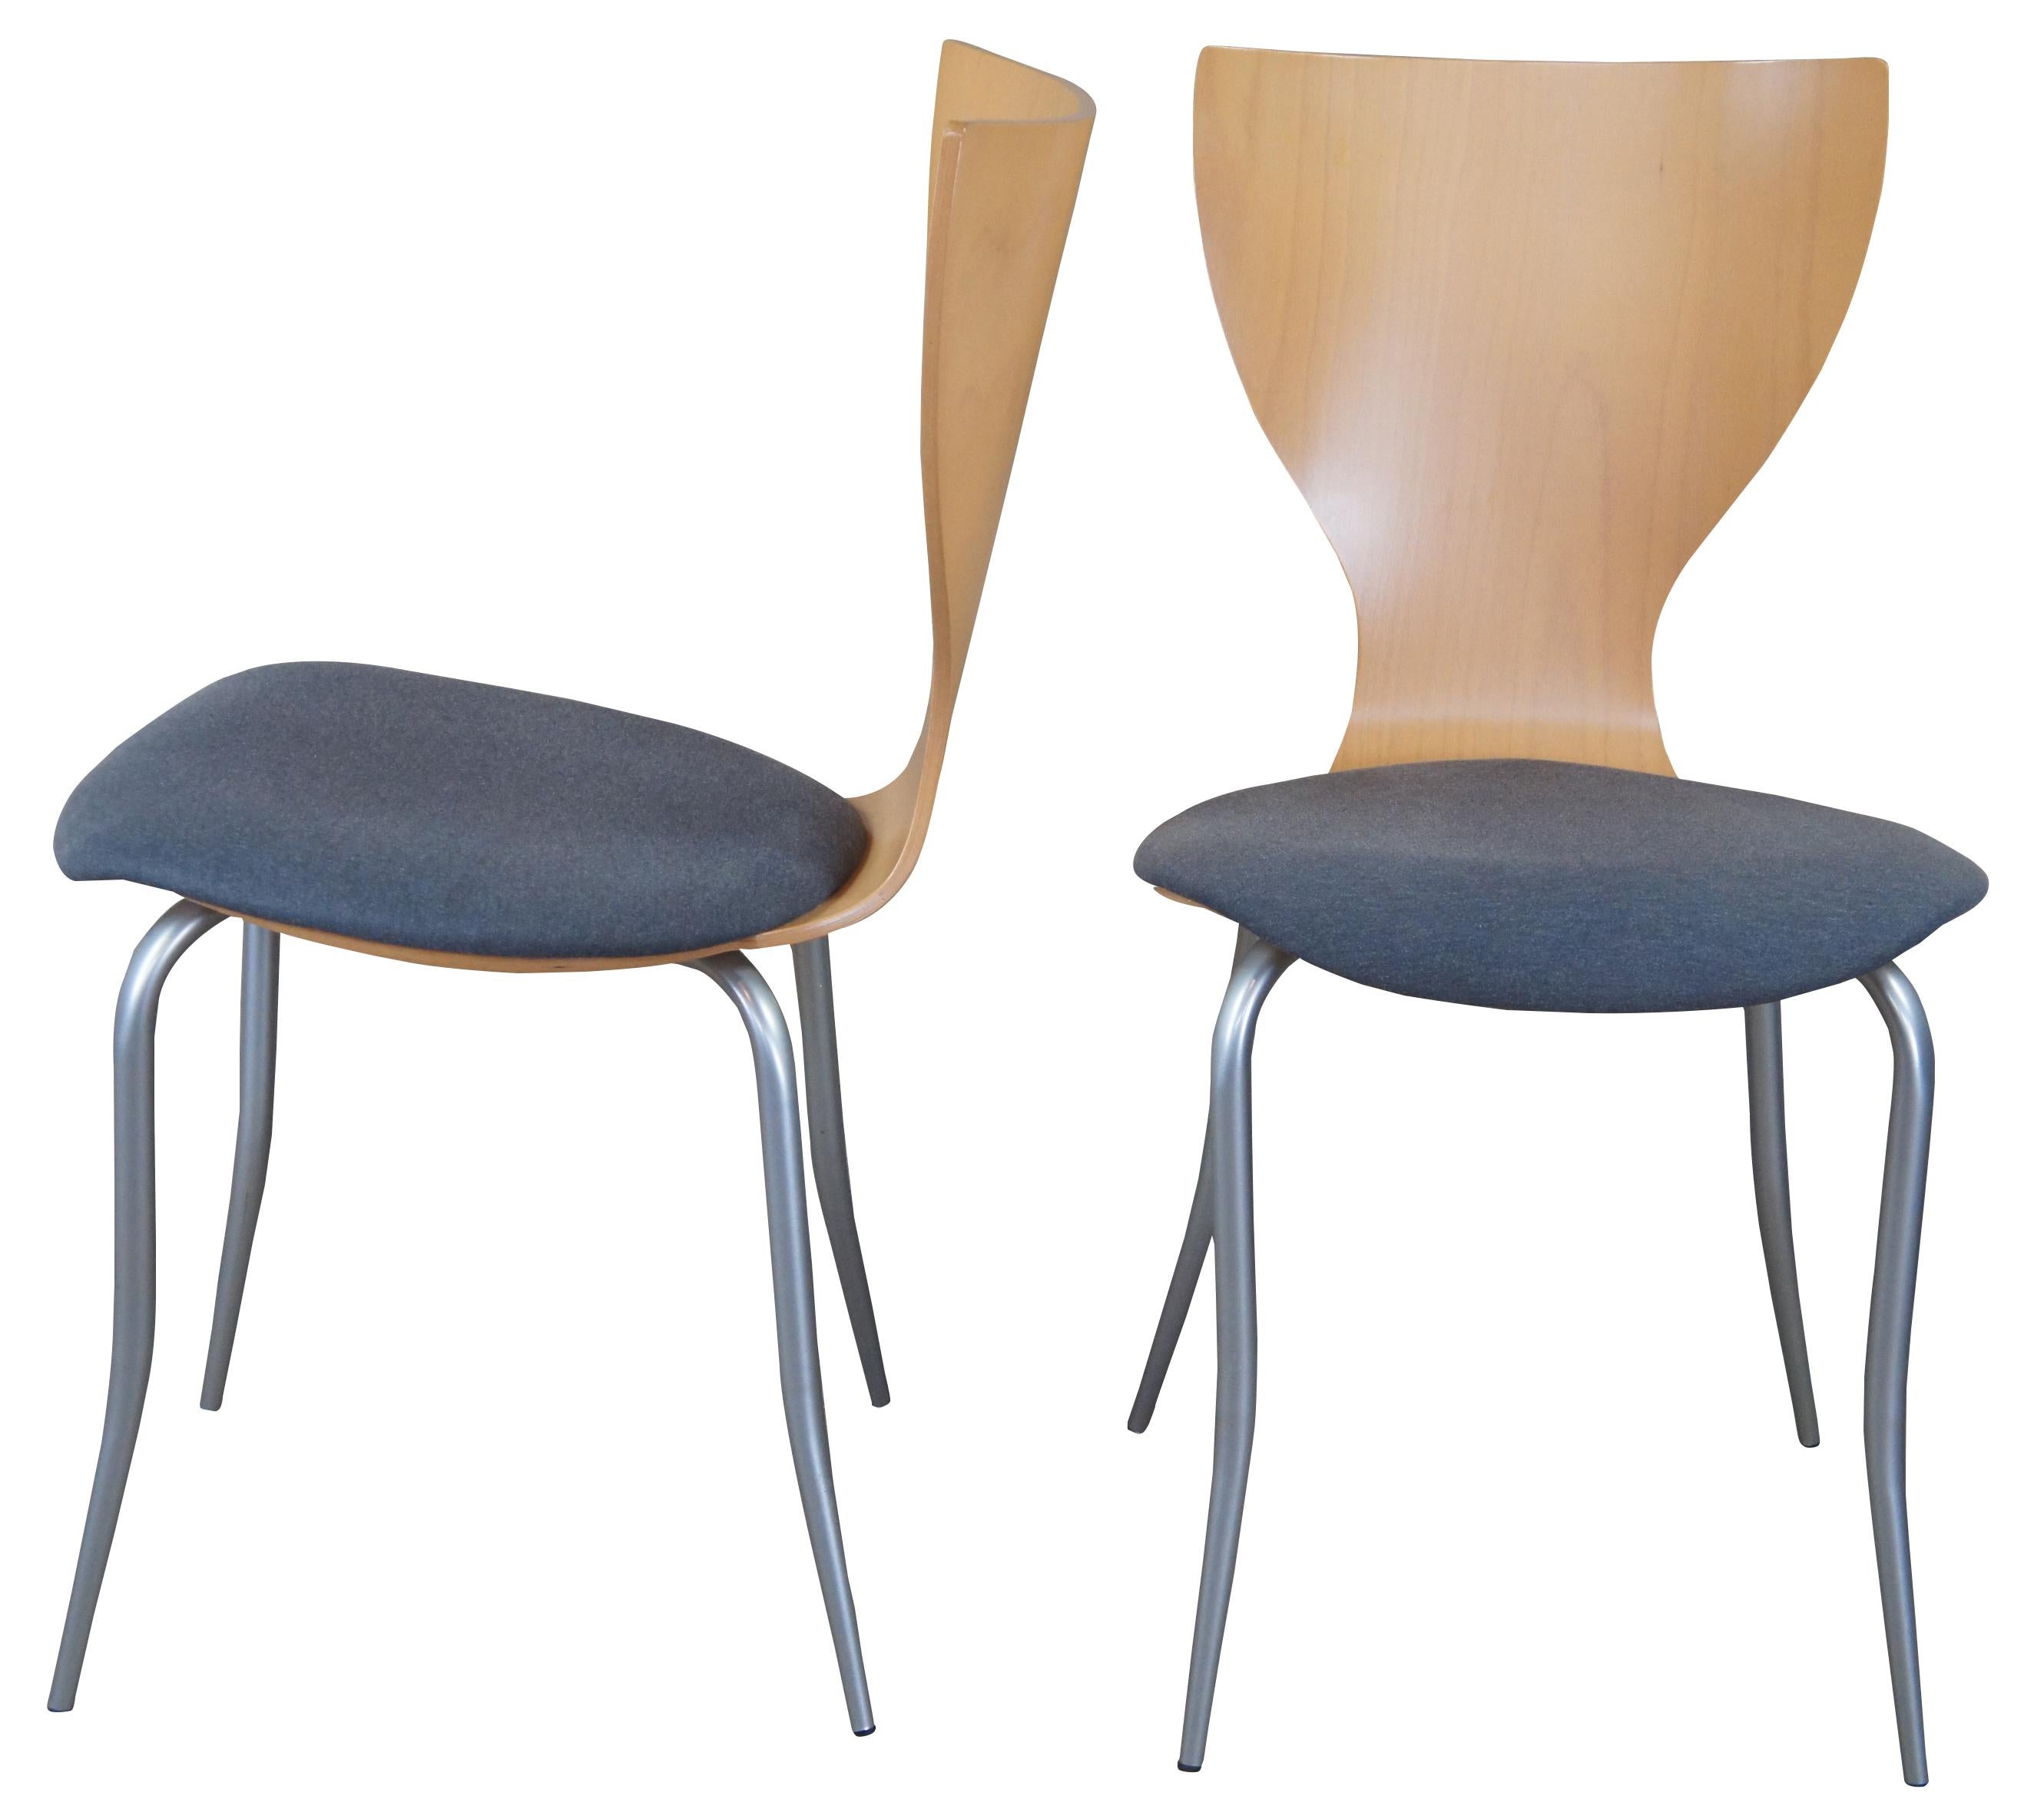 6 Calligaris Italian modern bentwood dining chairs. Features aluminum legs and an upholstered seat.
    